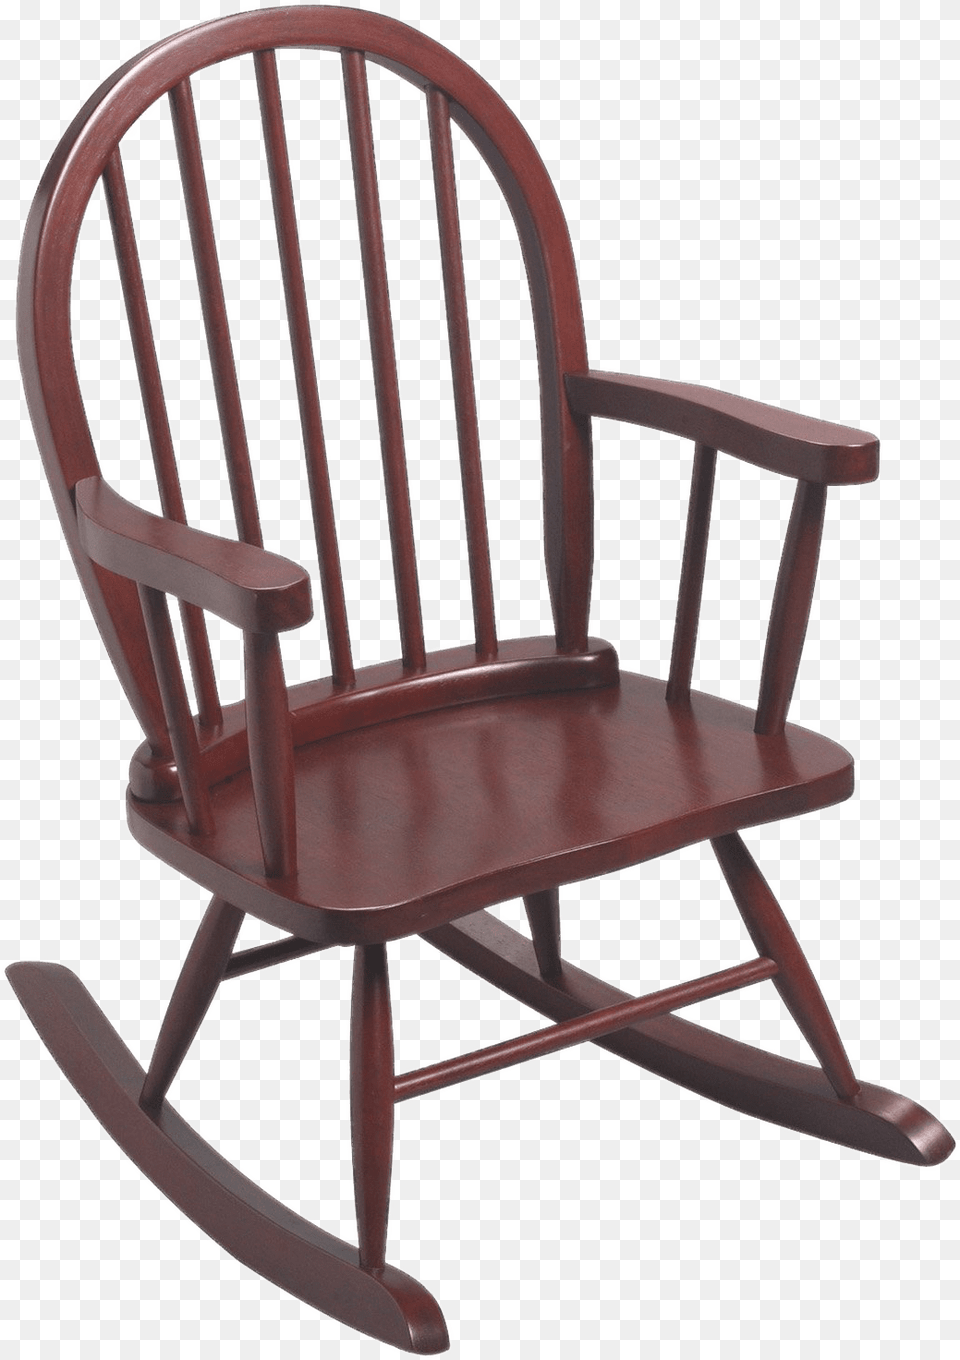 Childrens Rocking Chair Rocking Chair For Kids, Furniture, Rocking Chair Png